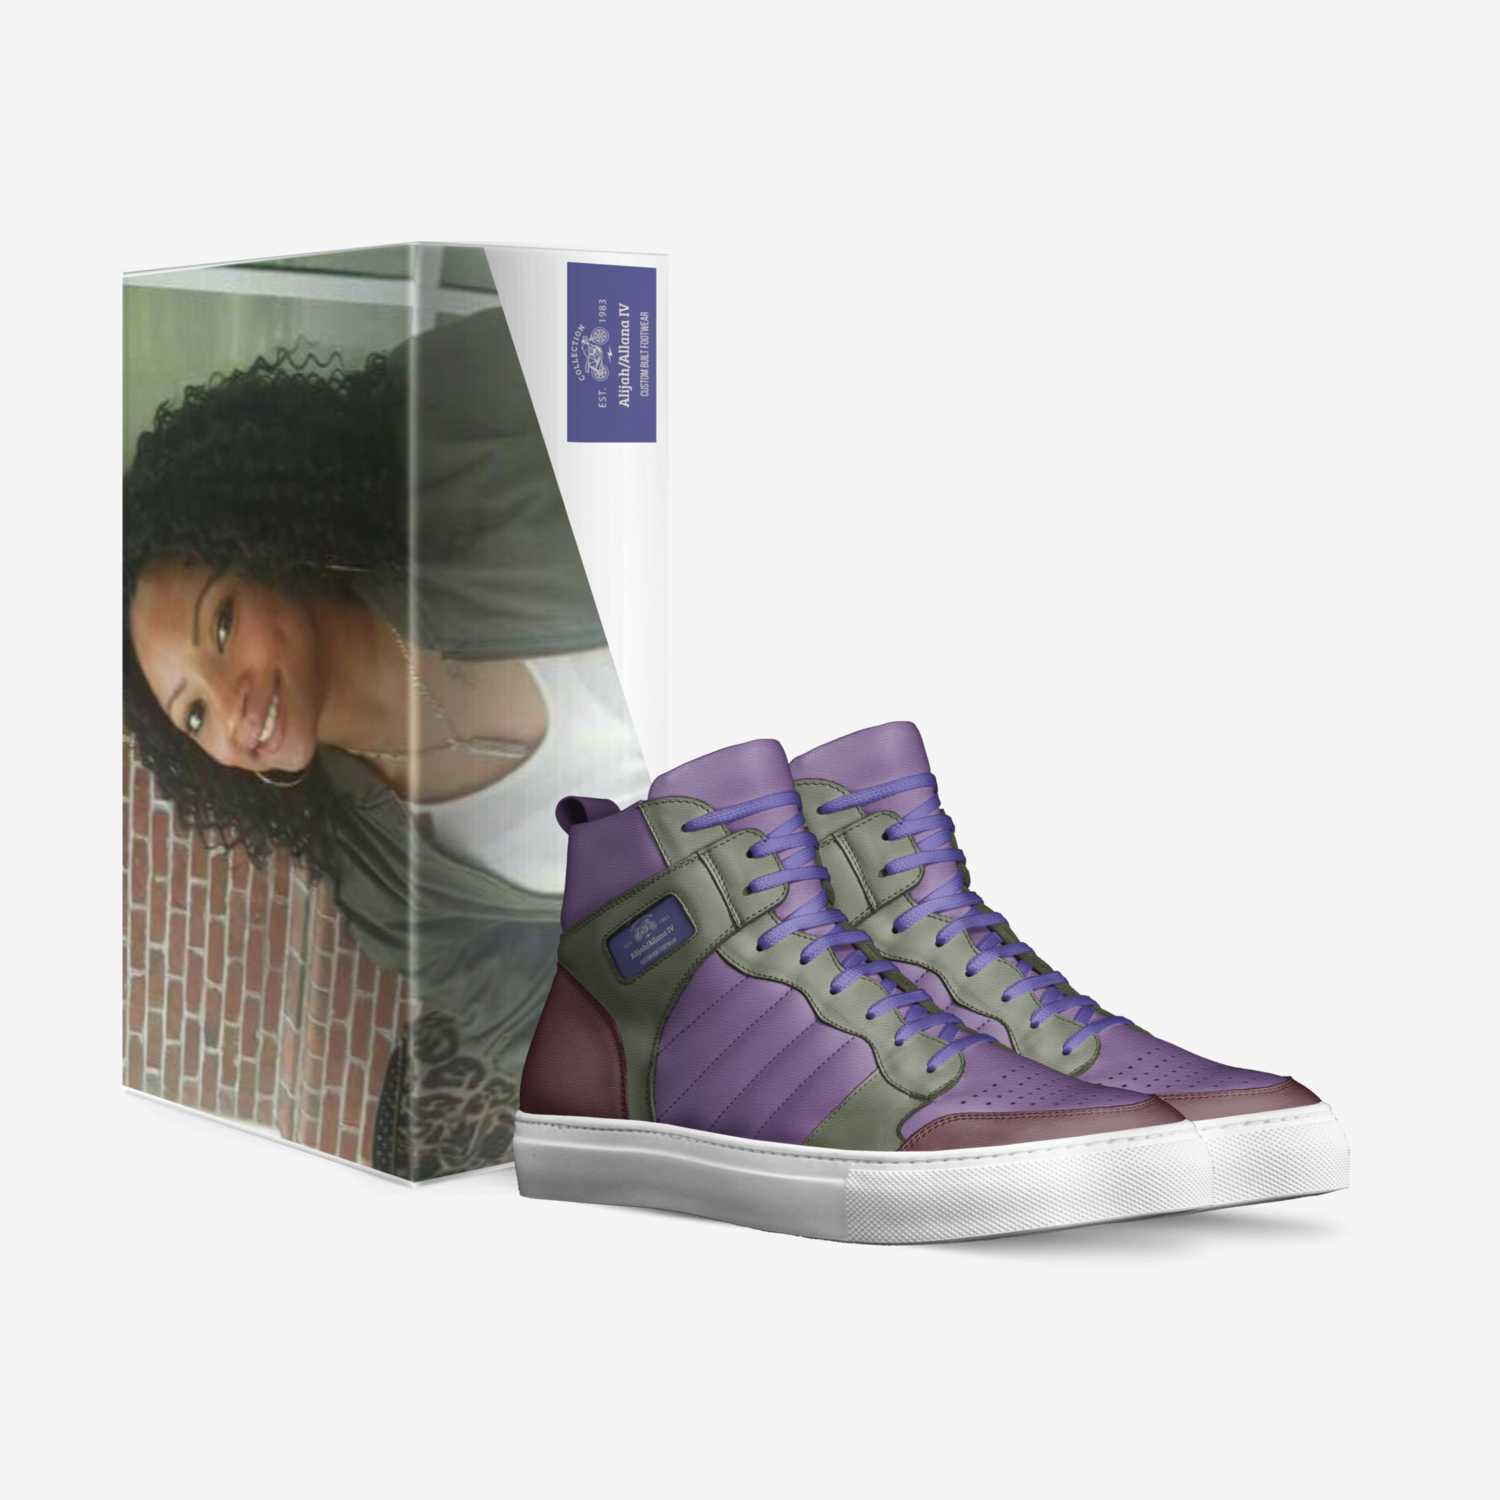 Alijah/Allana IV custom made in Italy shoes by Sherian L Smith | Box view